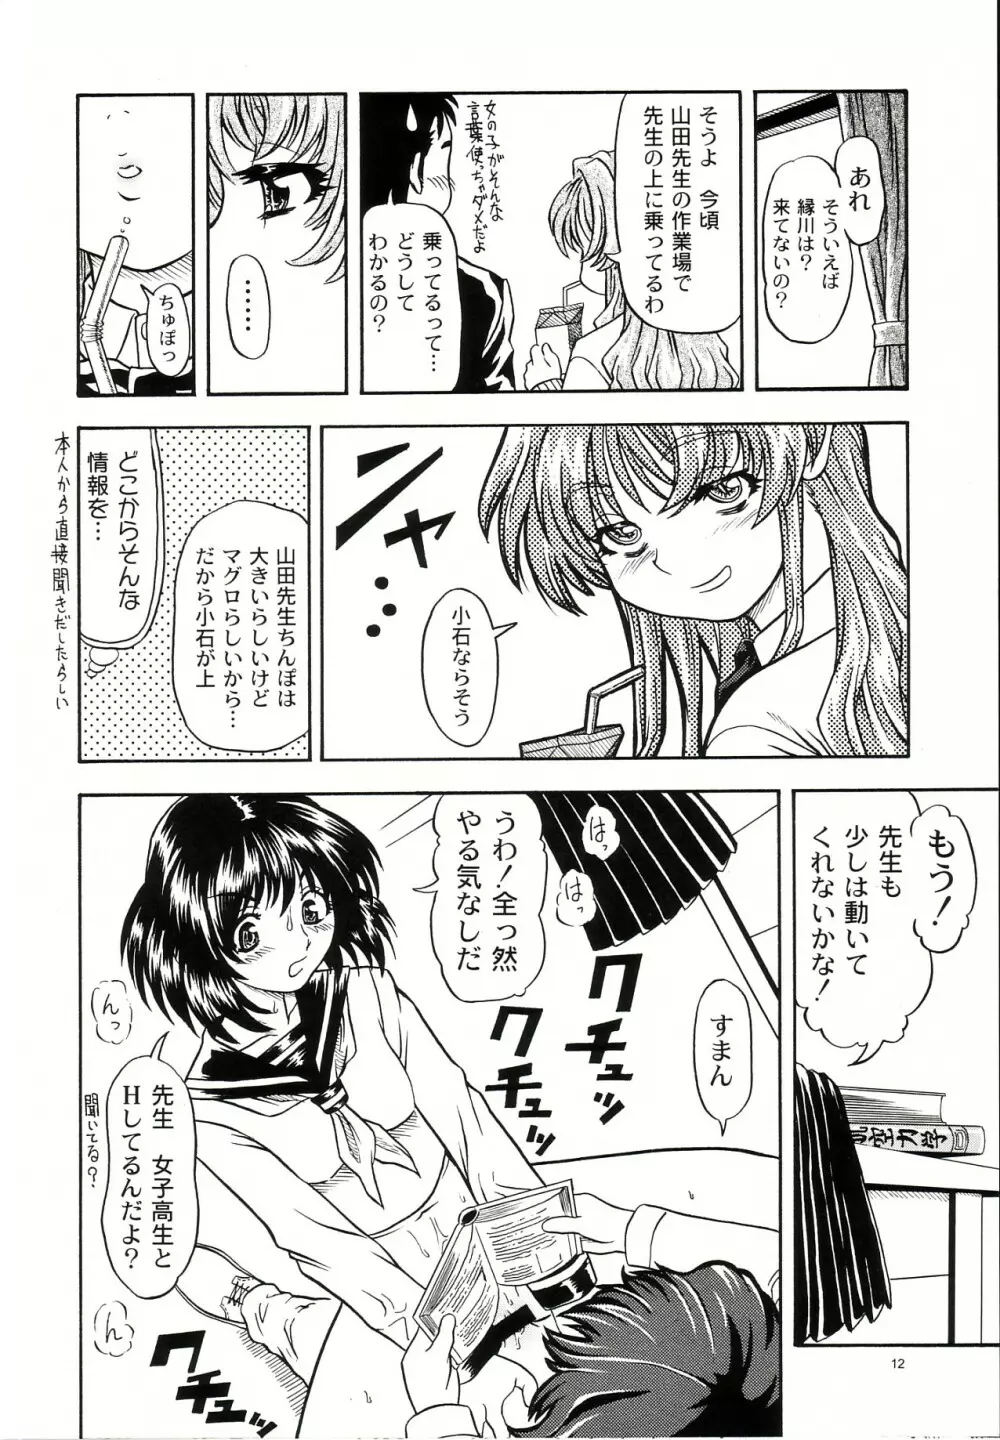 Lovely Strawberry Aged 21 Extra Edition Page.12